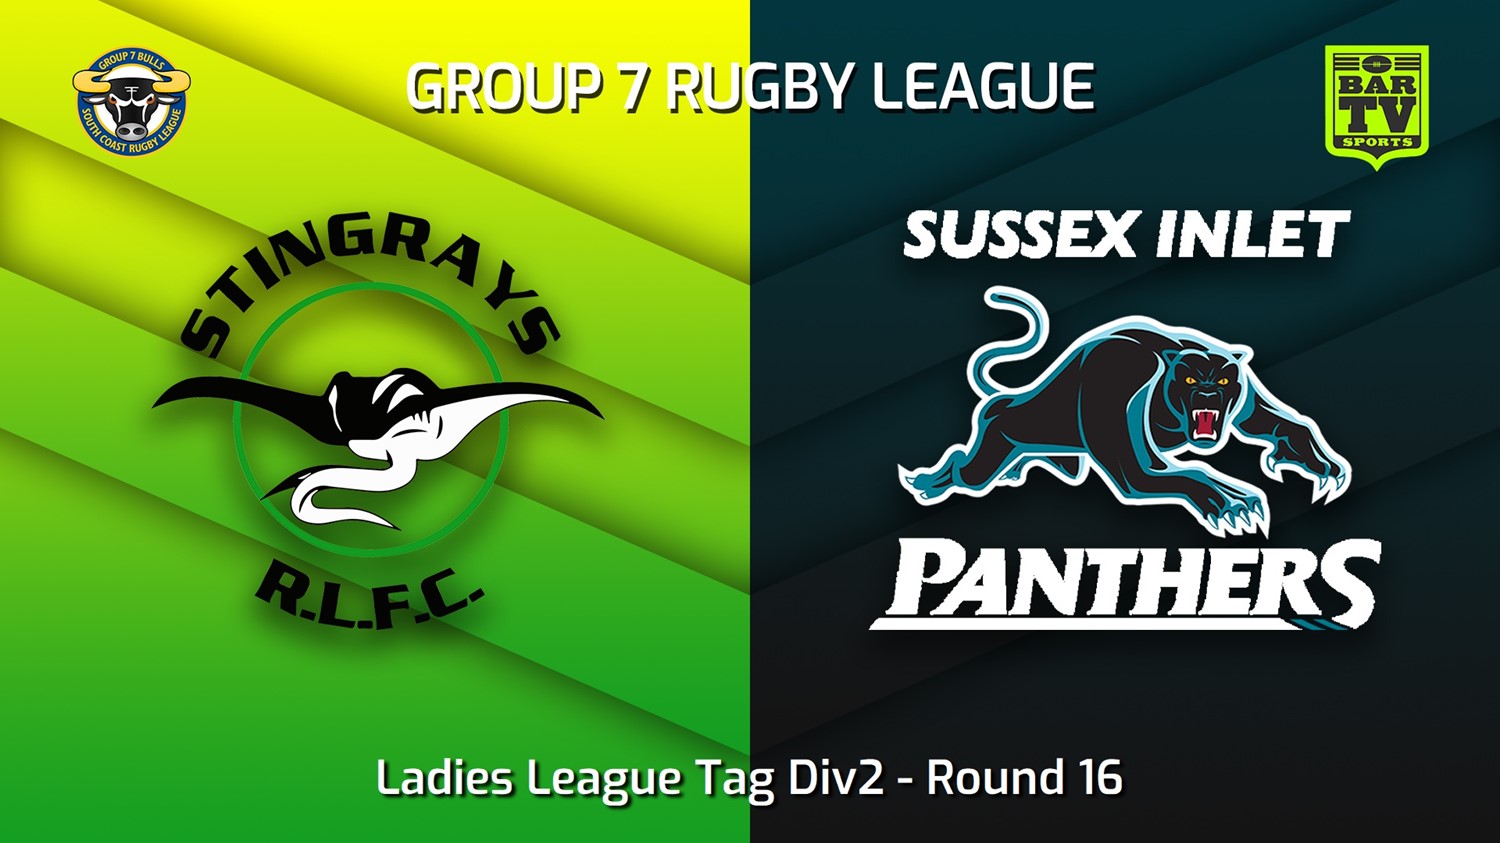 220814-South Coast Round 16 - Ladies League Tag Div2 - Stingrays of Shellharbour v Sussex Inlet Panthers Slate Image